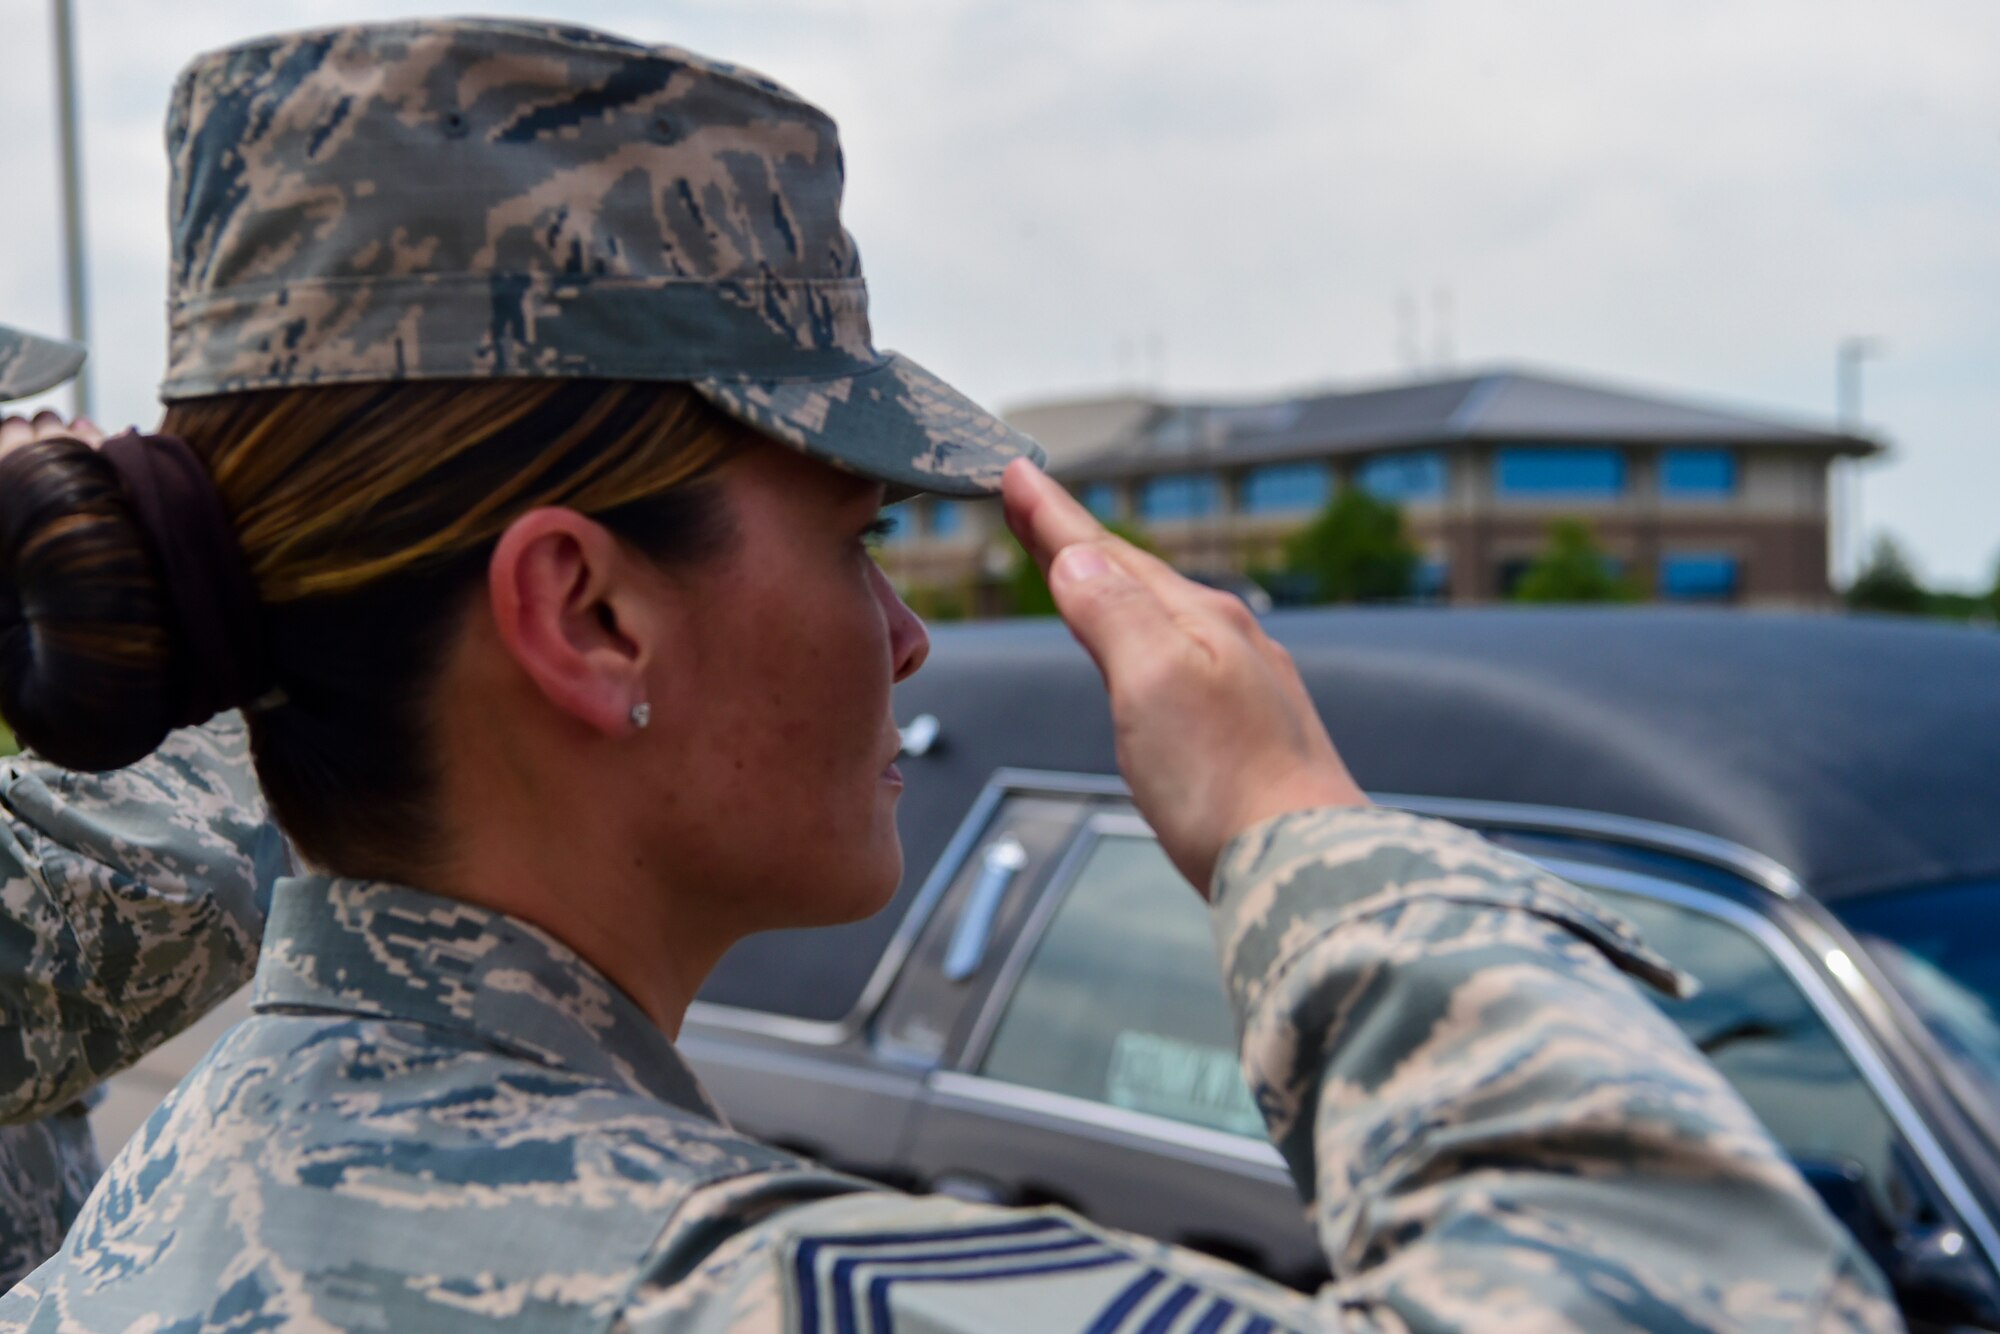 Chief Master Sgt. Billy Baber, superintendent, Future Systems and Operations at Headquarters Air Reserve Personnel Center, renders a final salute to Major Elgin Ross, chief, Total Force Service Center, assigned to HQ ARPC, June 27, 2017, on Buckley Air Force Base, Colo. Ross tragically passed away after becoming unresponsive while conducting his physical training test on June 16. The Buckley community paid their last respects to Ross and his family at a funeral procession on Aspen Street, from the Mississippi Gate to the 6th Avenue Gate. (U.S. Air Force photo by Senior Airman Madison Ratley/Released)